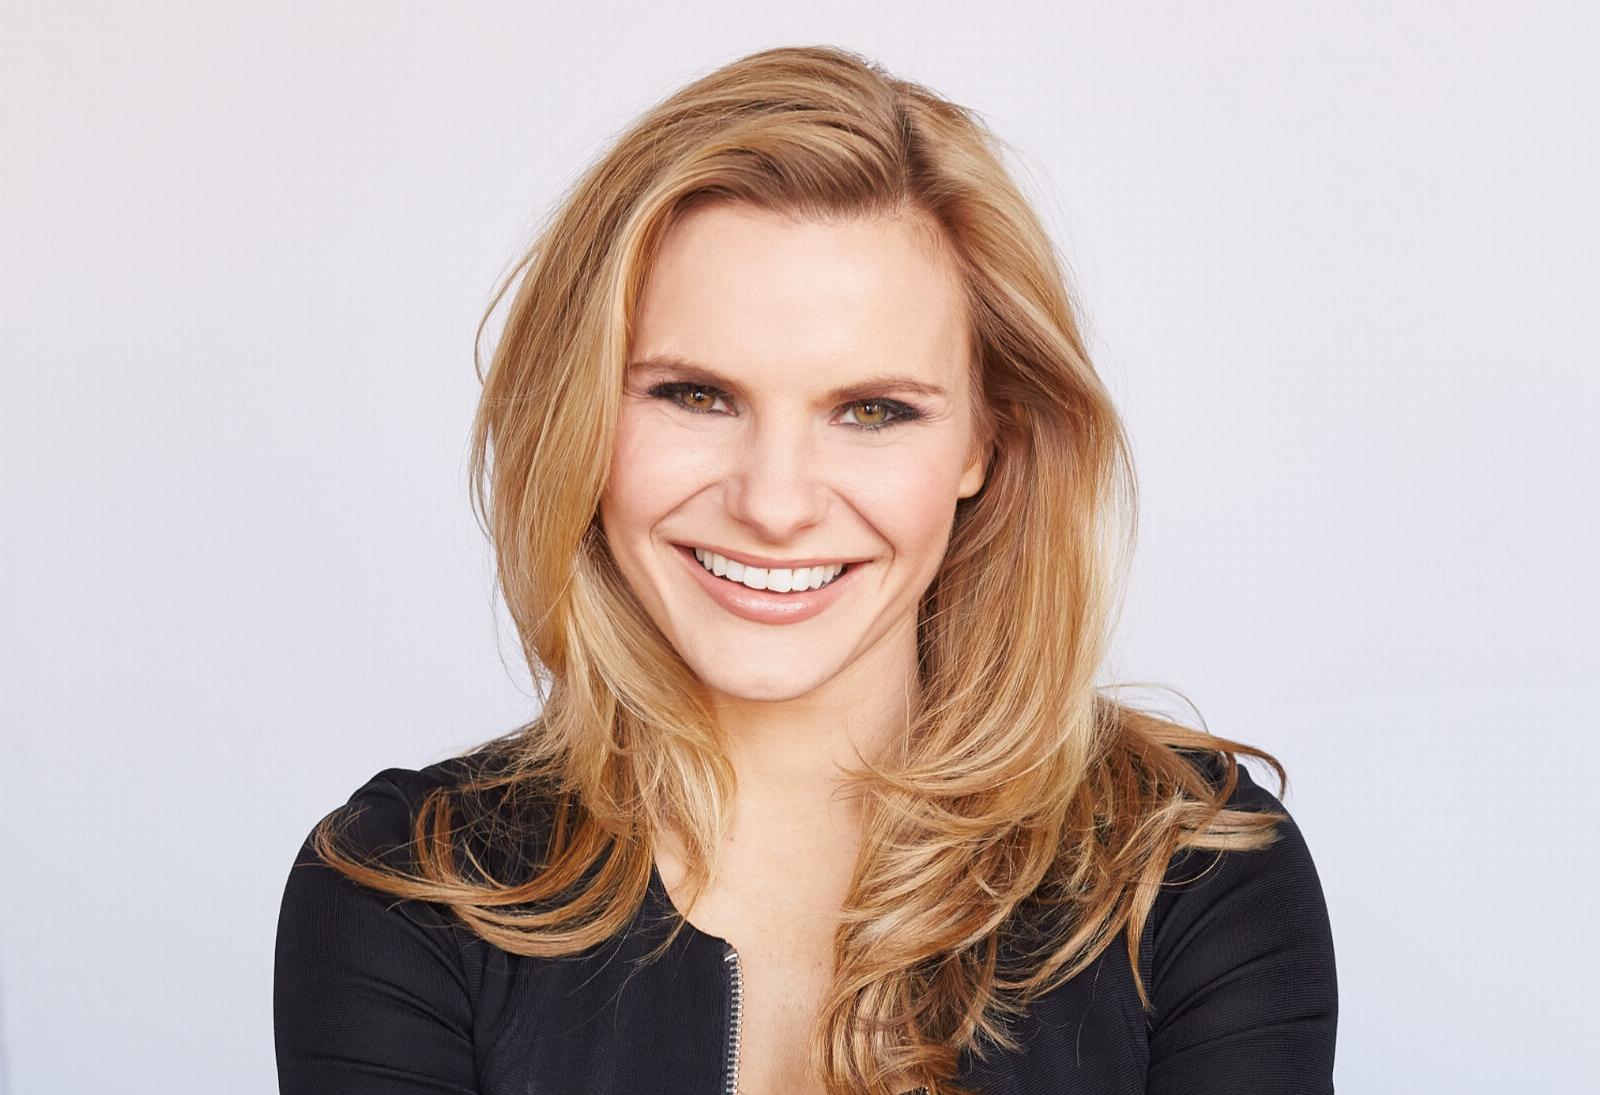 Clearco co-founder Michele Romanow steps down, cuts 30% of staff